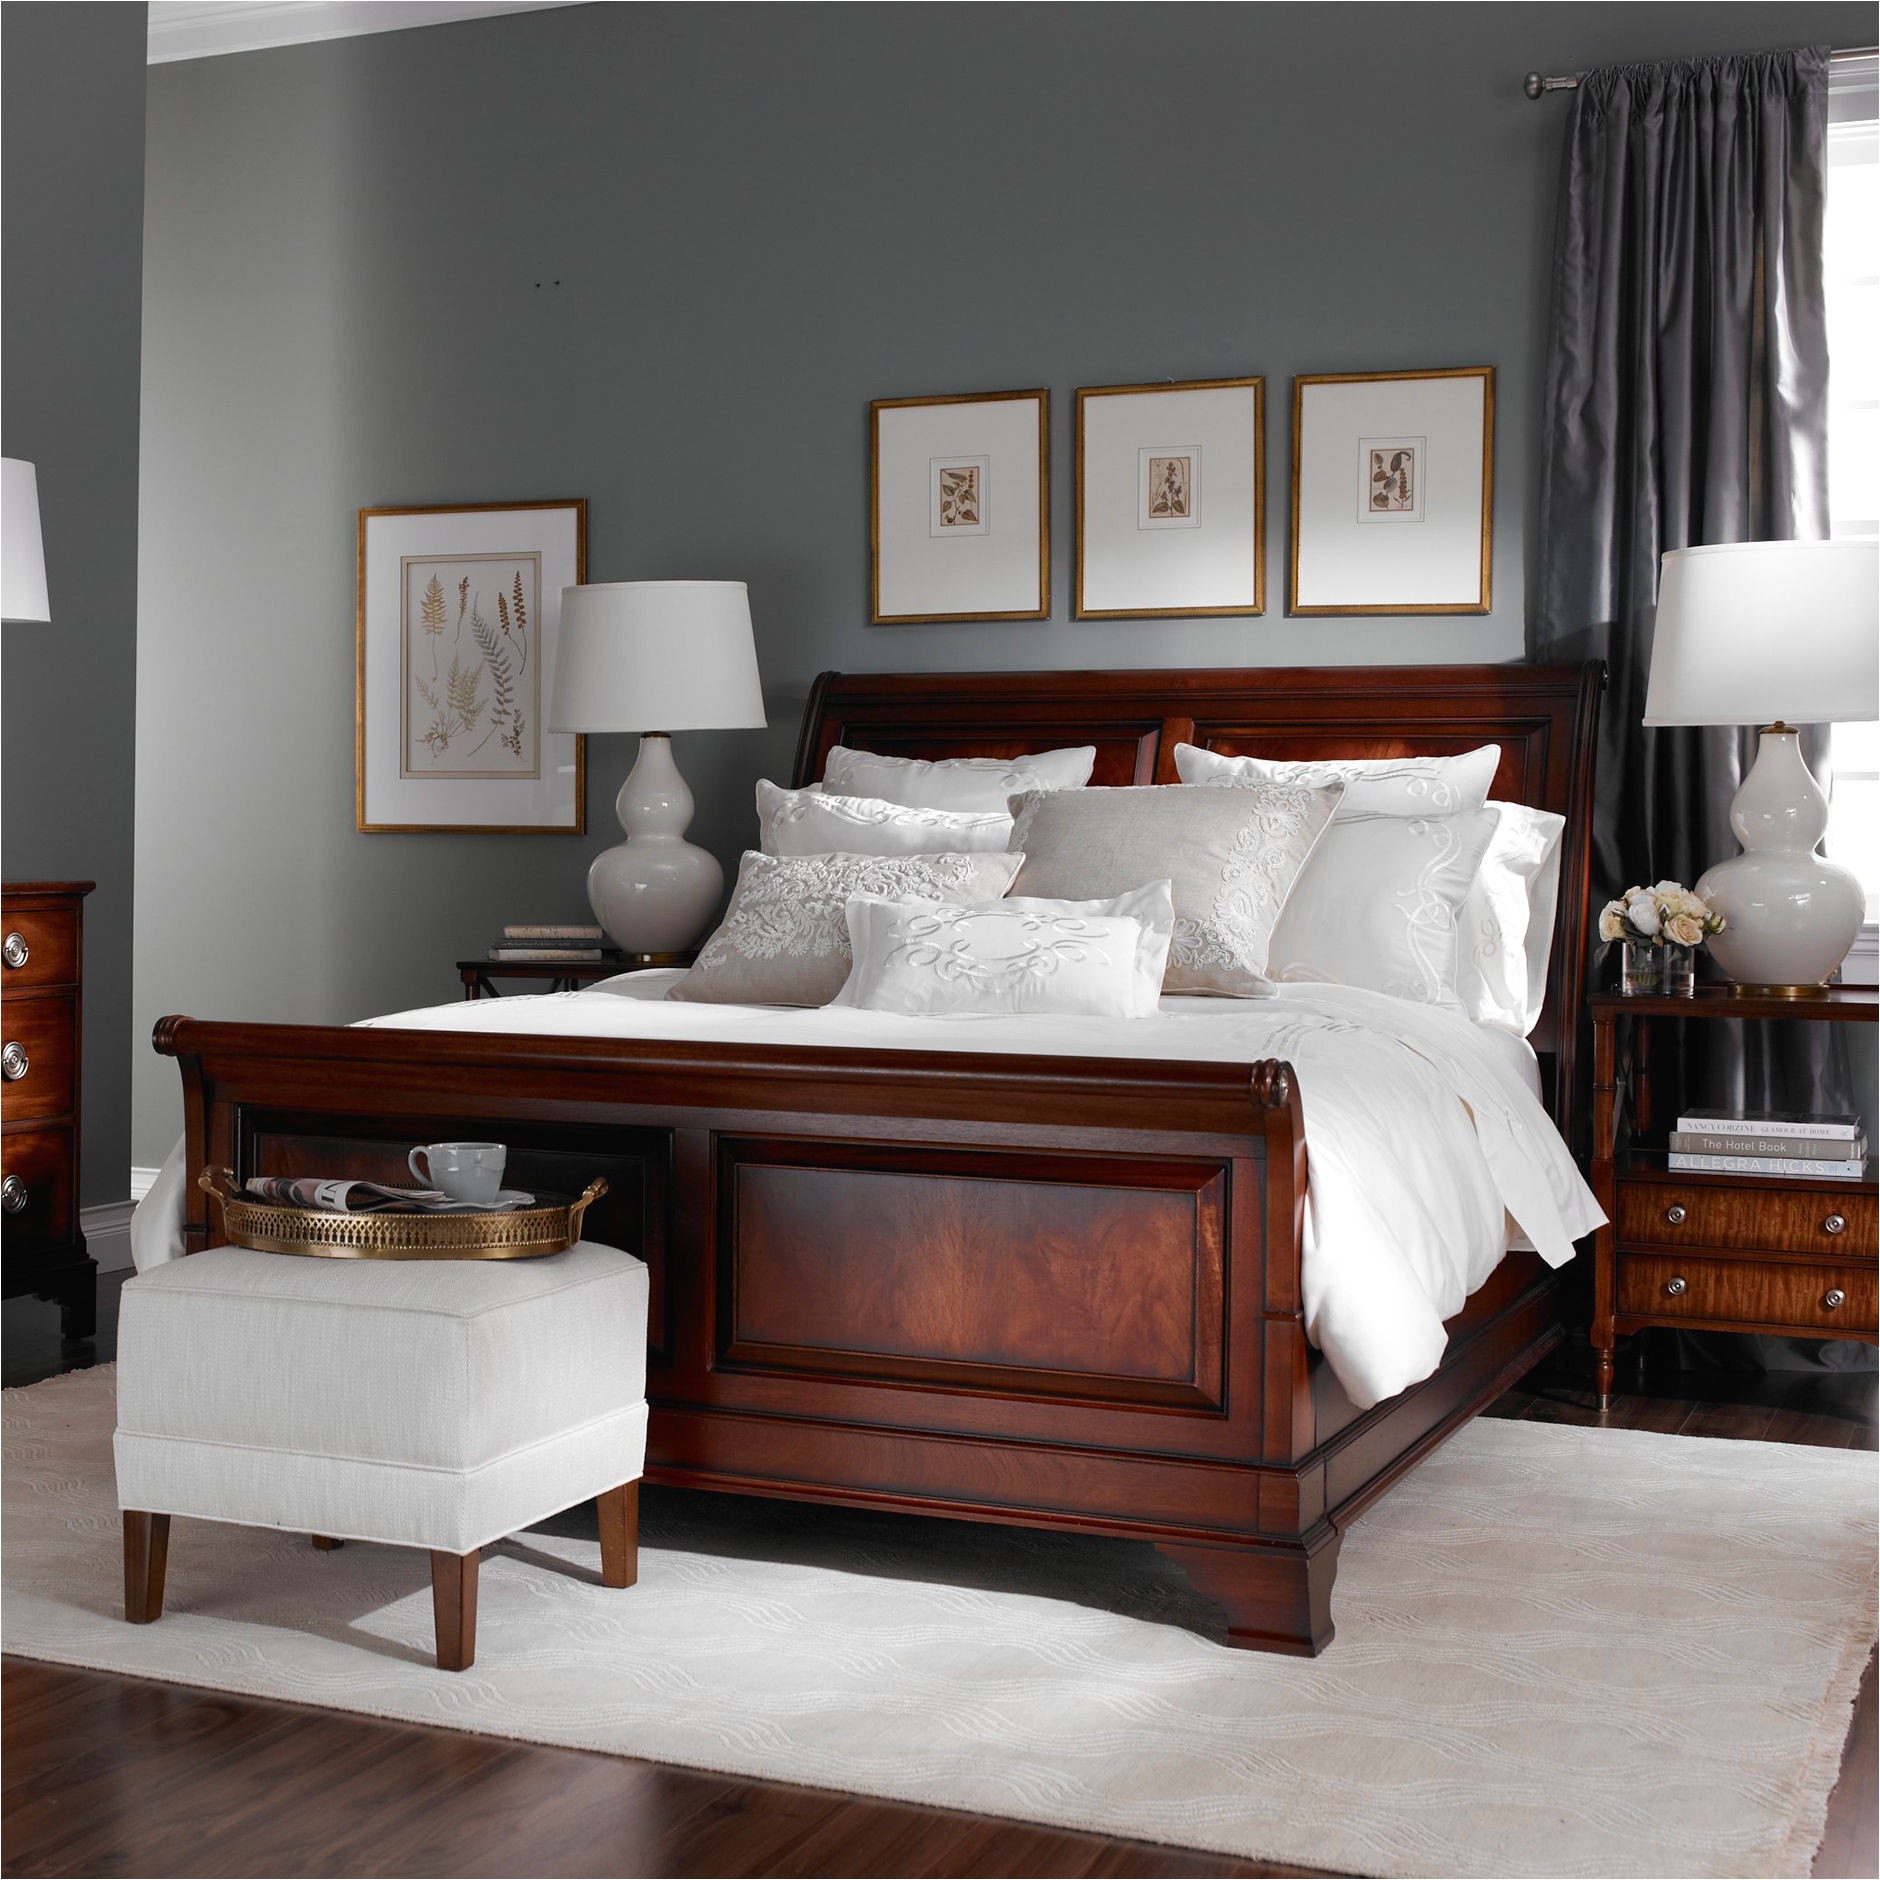 ethan allen bedroom sets awesome exceptional ethan allen bedroom sets at new great cherry furniture